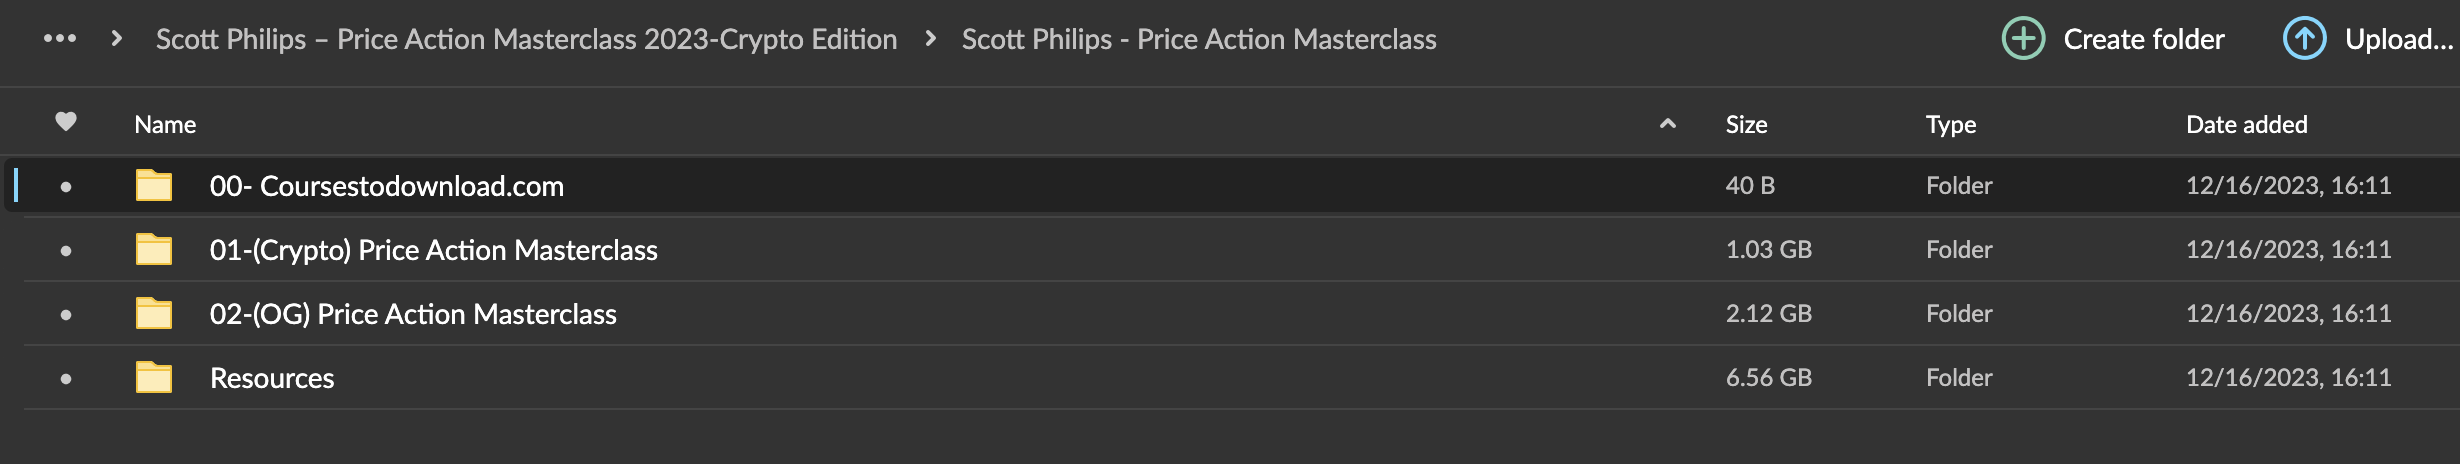 Scott Philips – Price Action Masterclass 2023-Crypto Edition Download